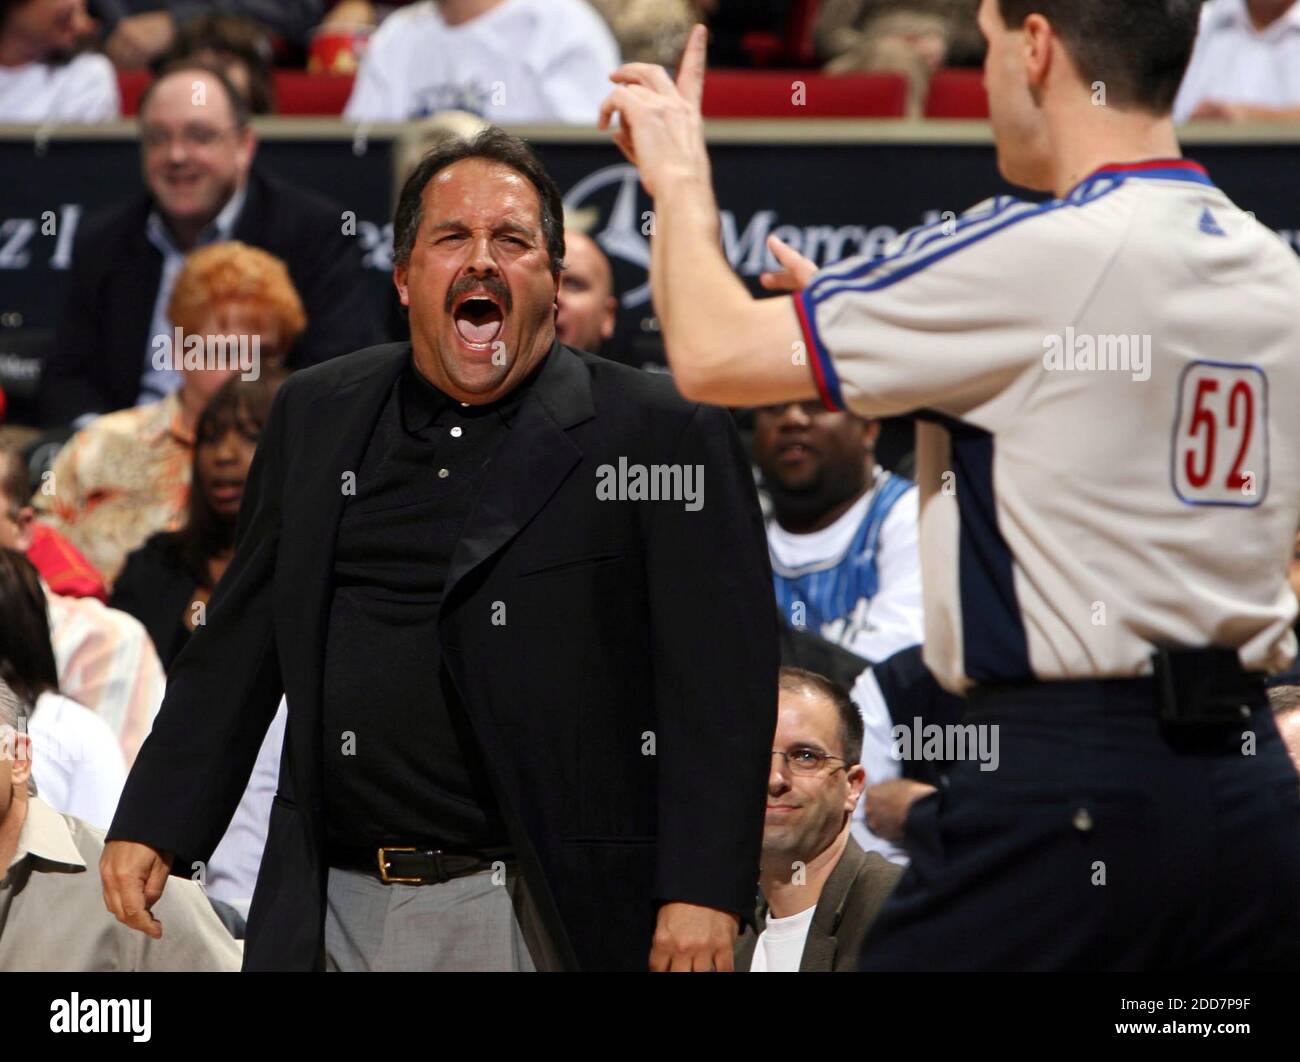 Orlando Magic head coach Stan Van Gundy screams at game official Pat Fraher (52) during action against the Golden State Warriors at Amway Arena in Orlando, FL, USA on March 8, 2008. Golden State Warriors won 104-95. Photo by Stephen M. Dowell/Orlando Sentinel/MCT/Cameleon/ABACAPRESS.COM Stock Photo